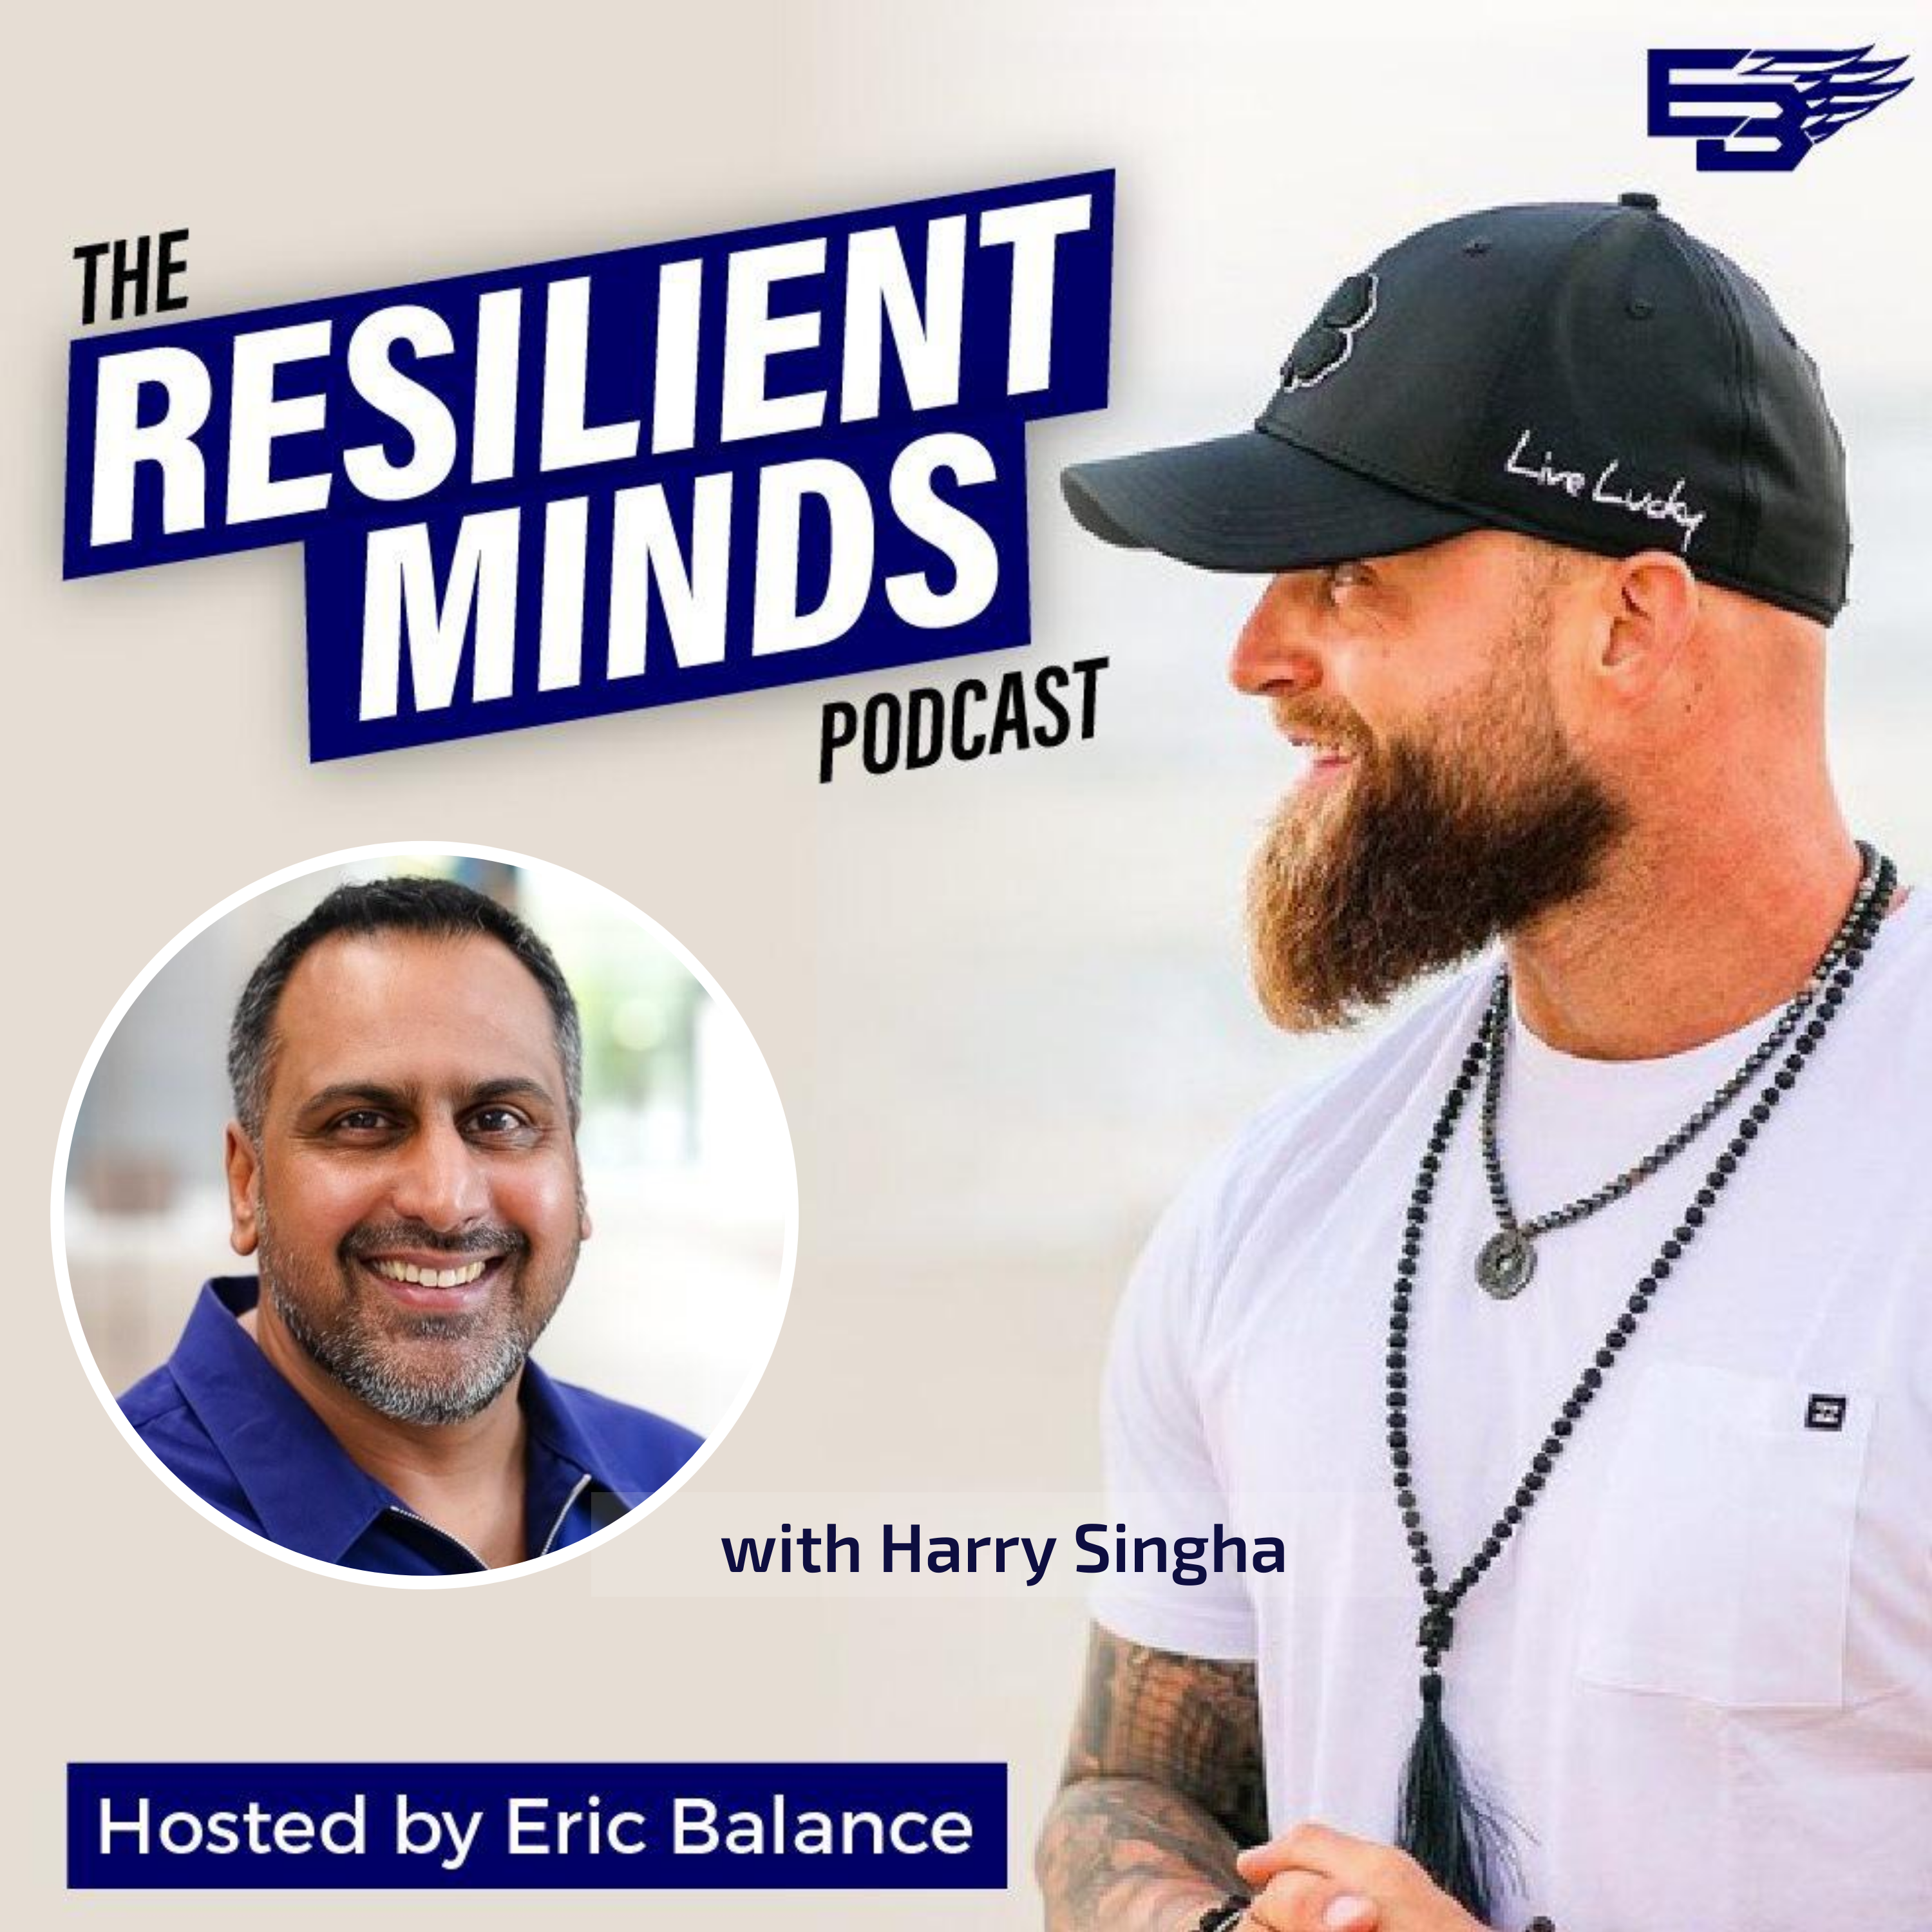 Episode 54 – How To Achieve Greatness Through Your Own Light with Harry Singha.